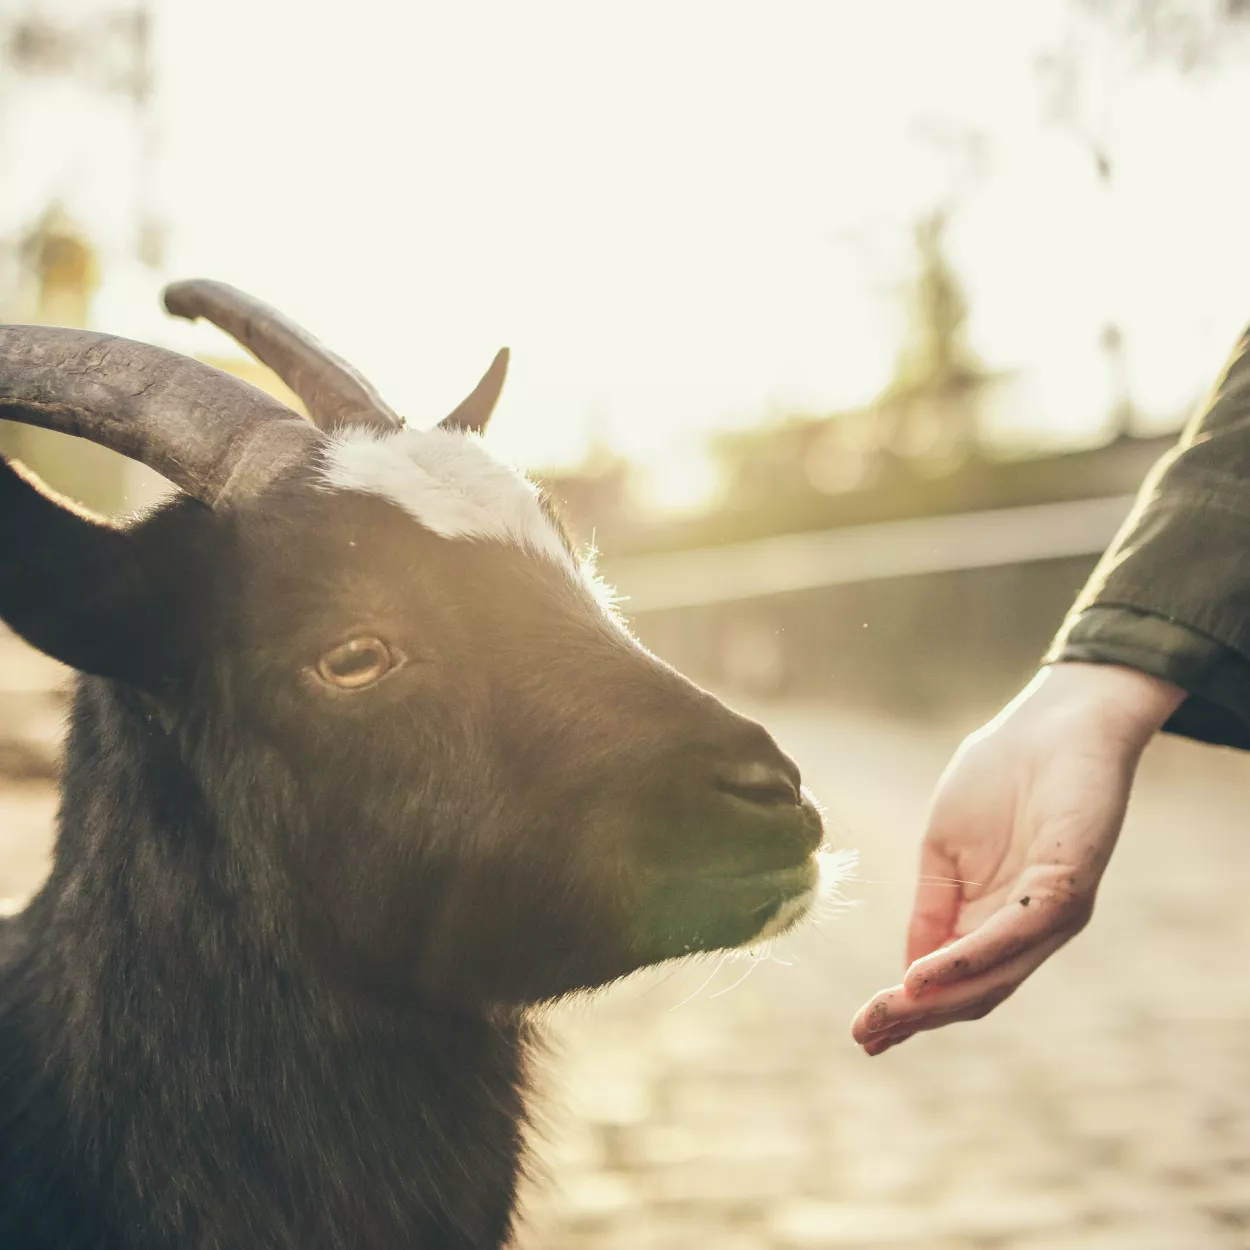 Hand reaching out to stroke goat